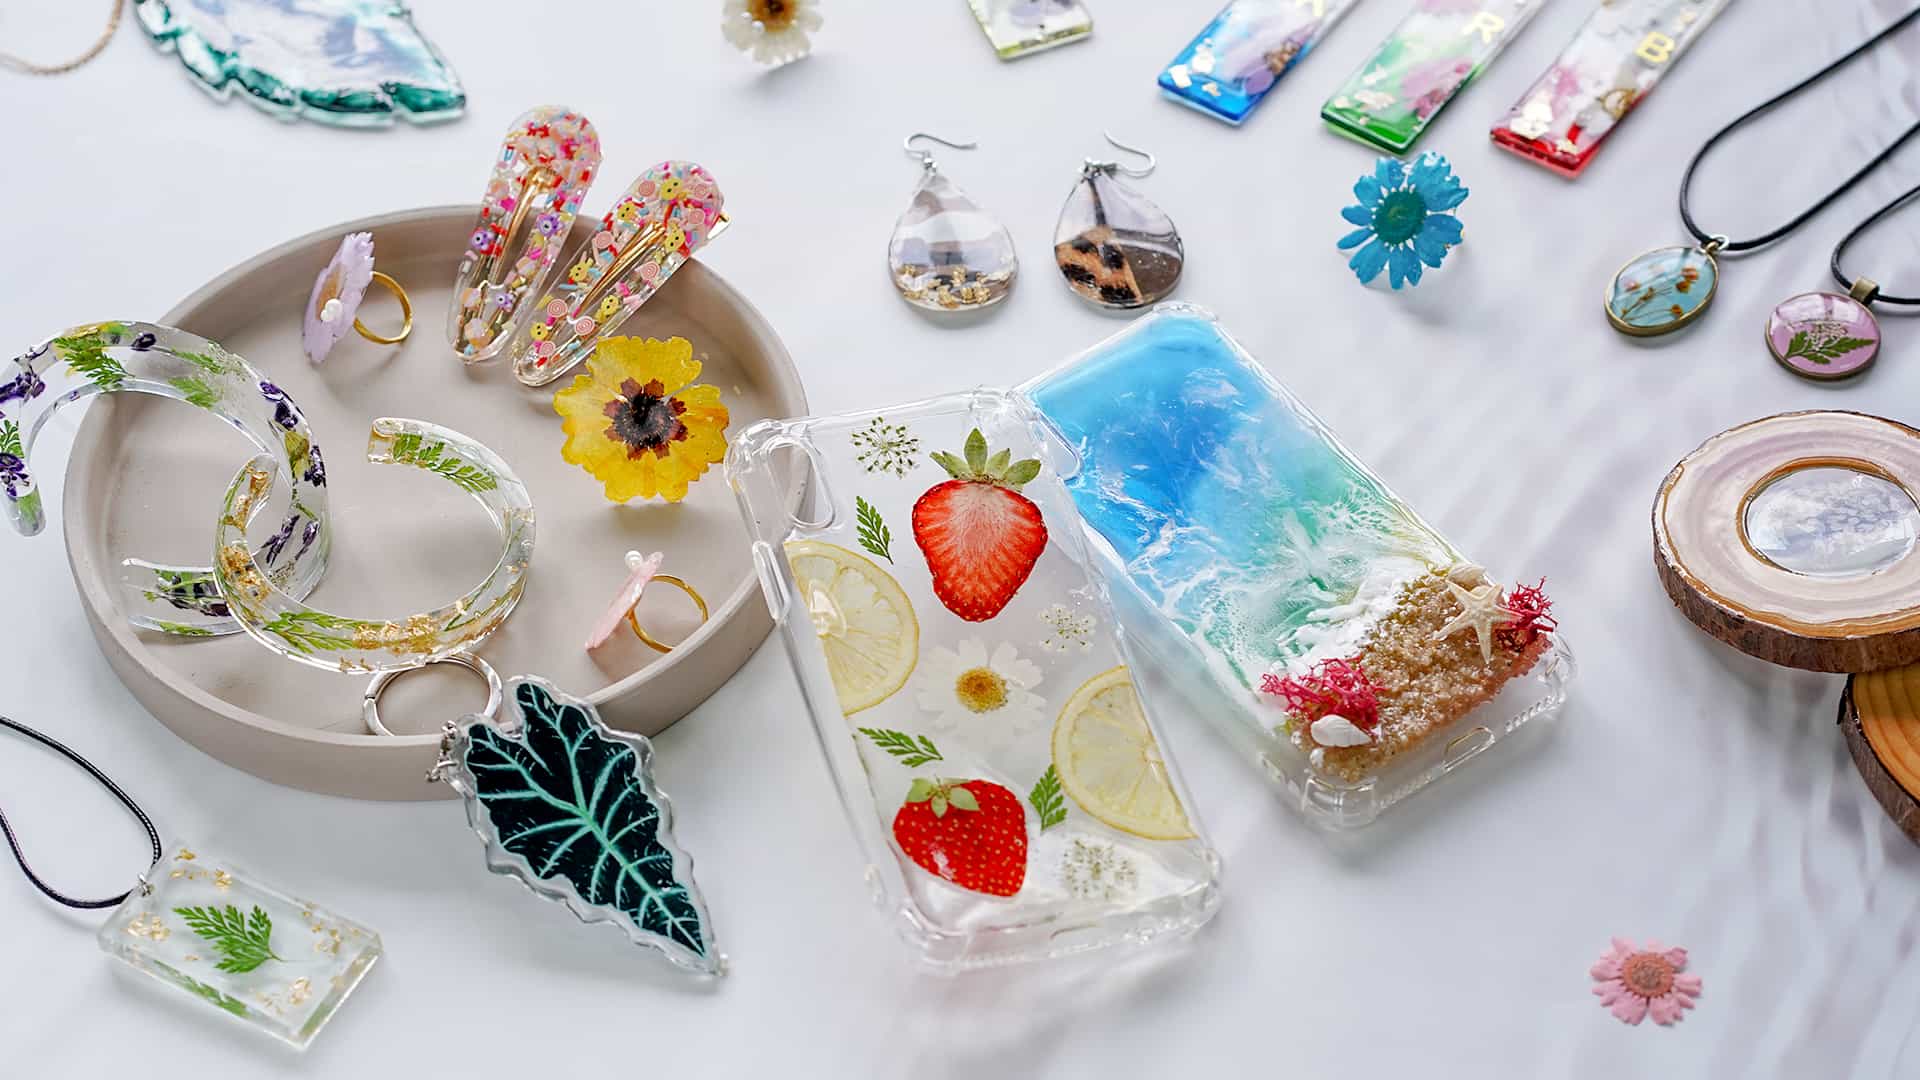 Making Resin Jewelry with the Let's Resin DIY Kit - A Fun and Relaxing  Activity 